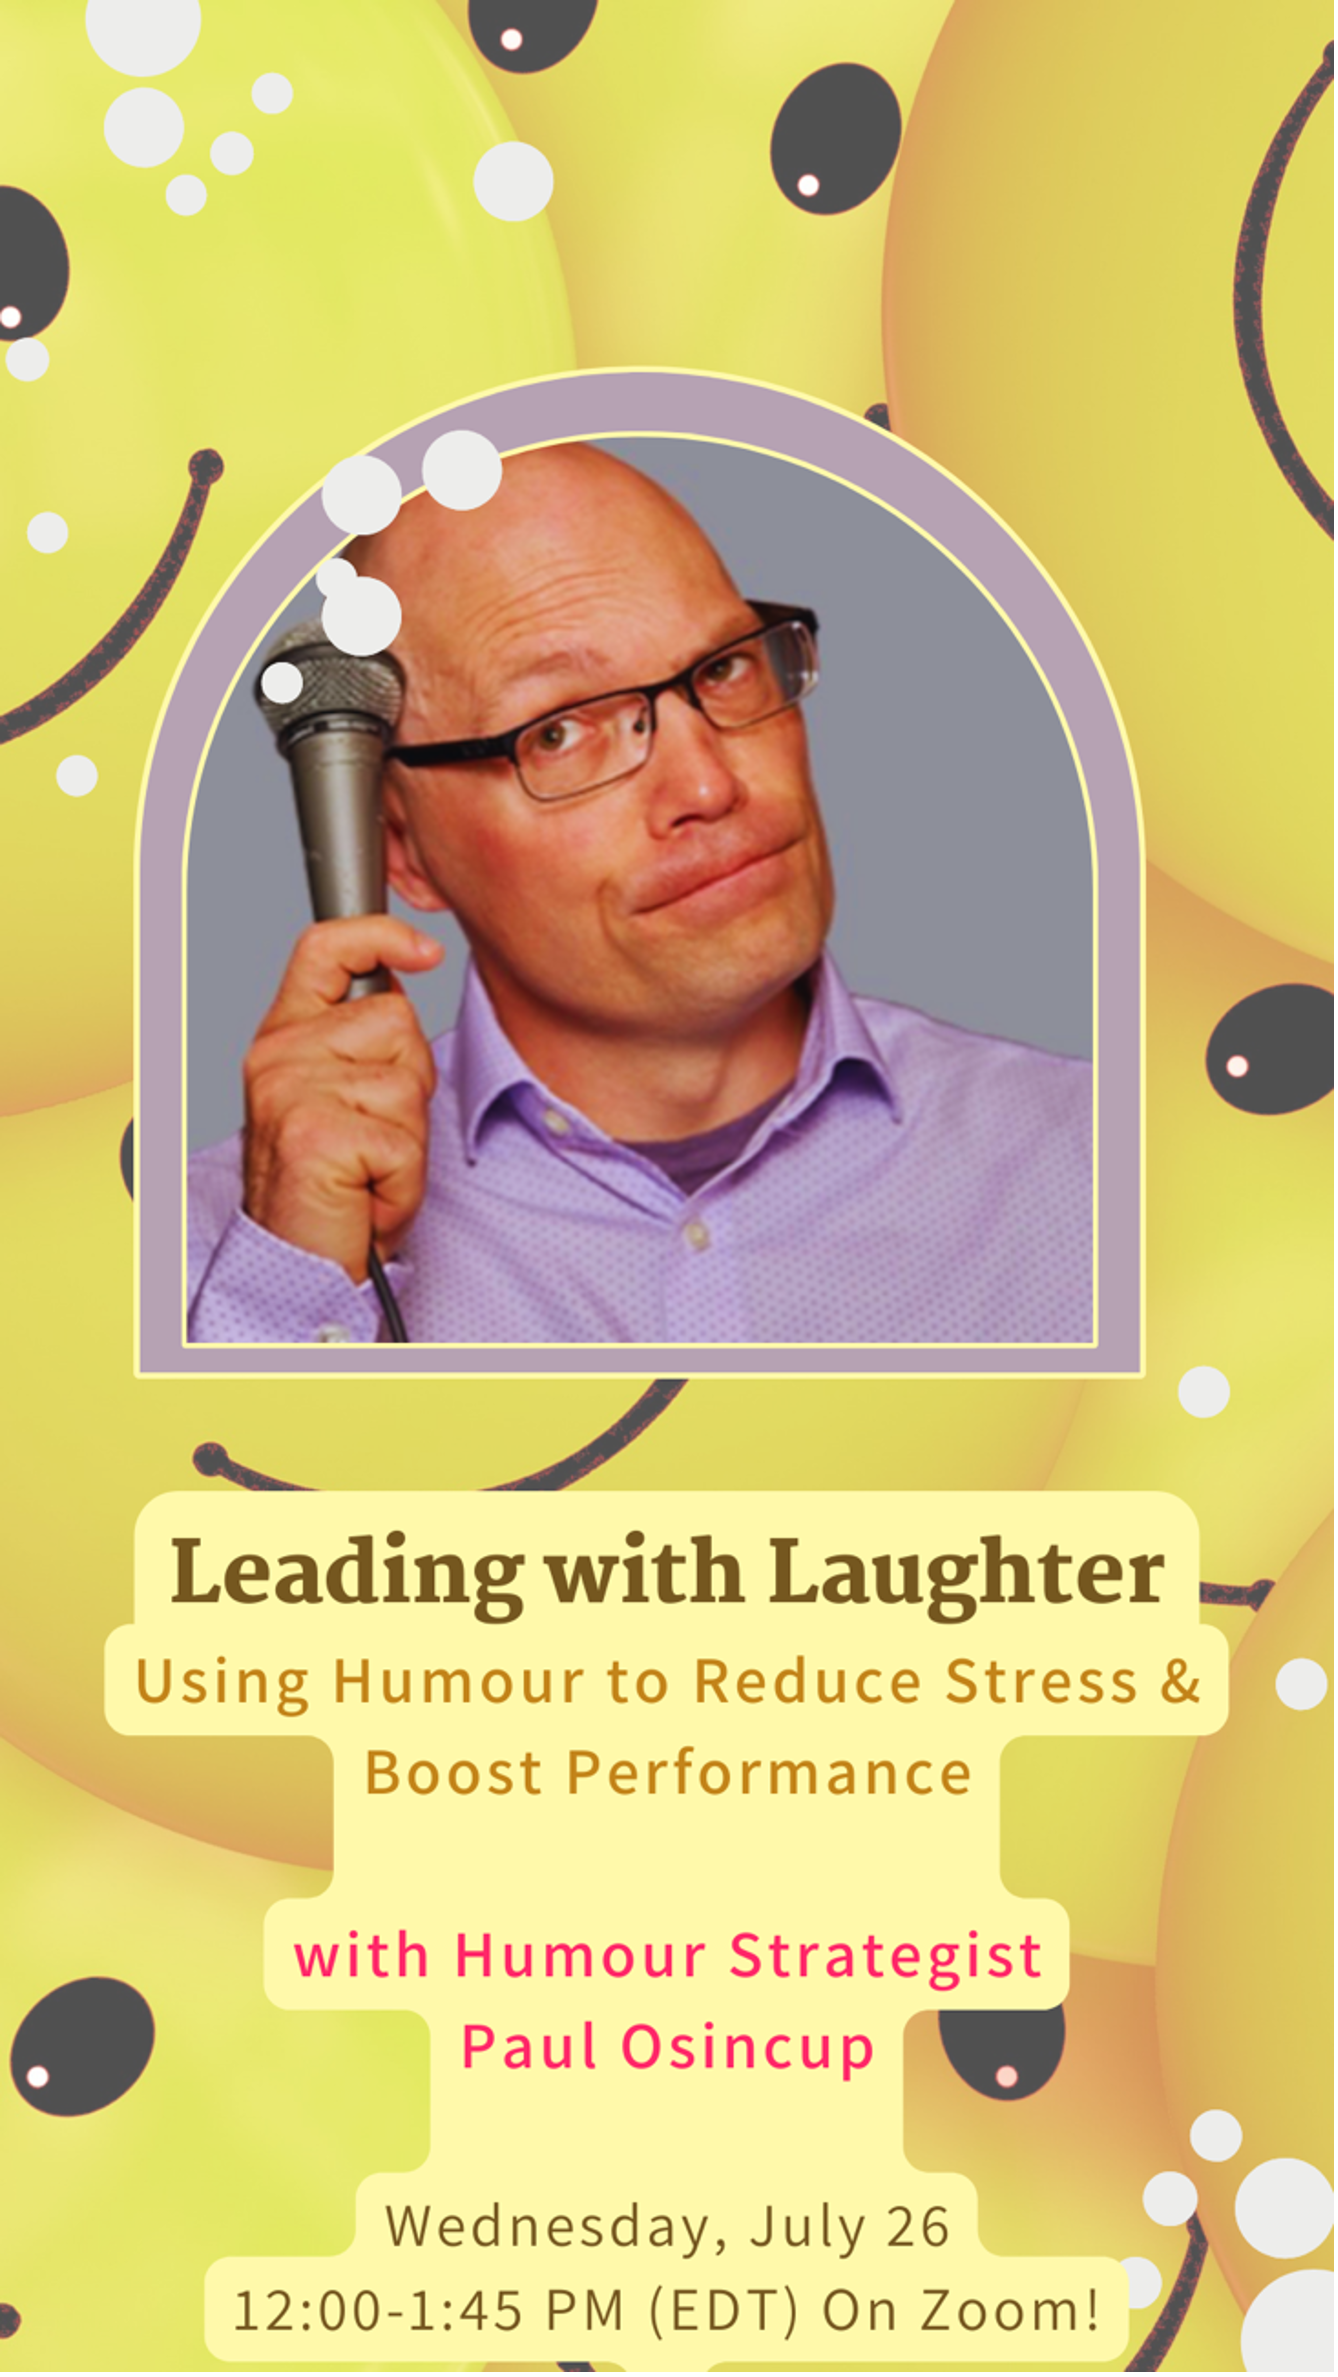 Using humour to reduce stress and boost performance